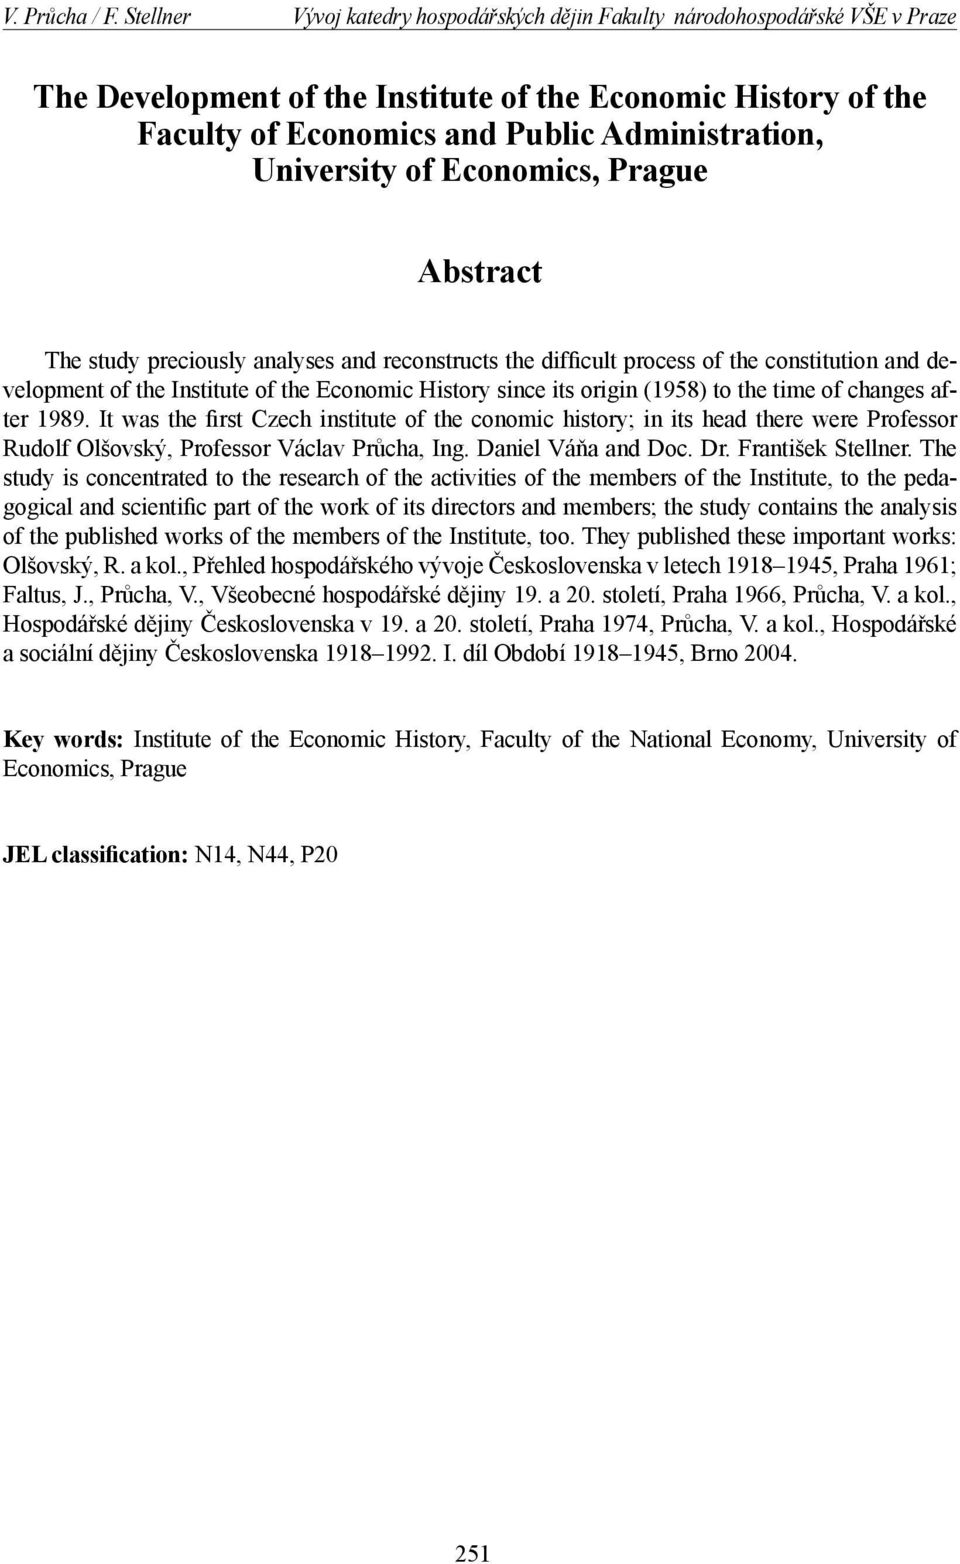 University of Economics, Prague Abstract The study preciously analyses and reconstructs the difficult process of the constitution and development of the Institute of the Economic History since its